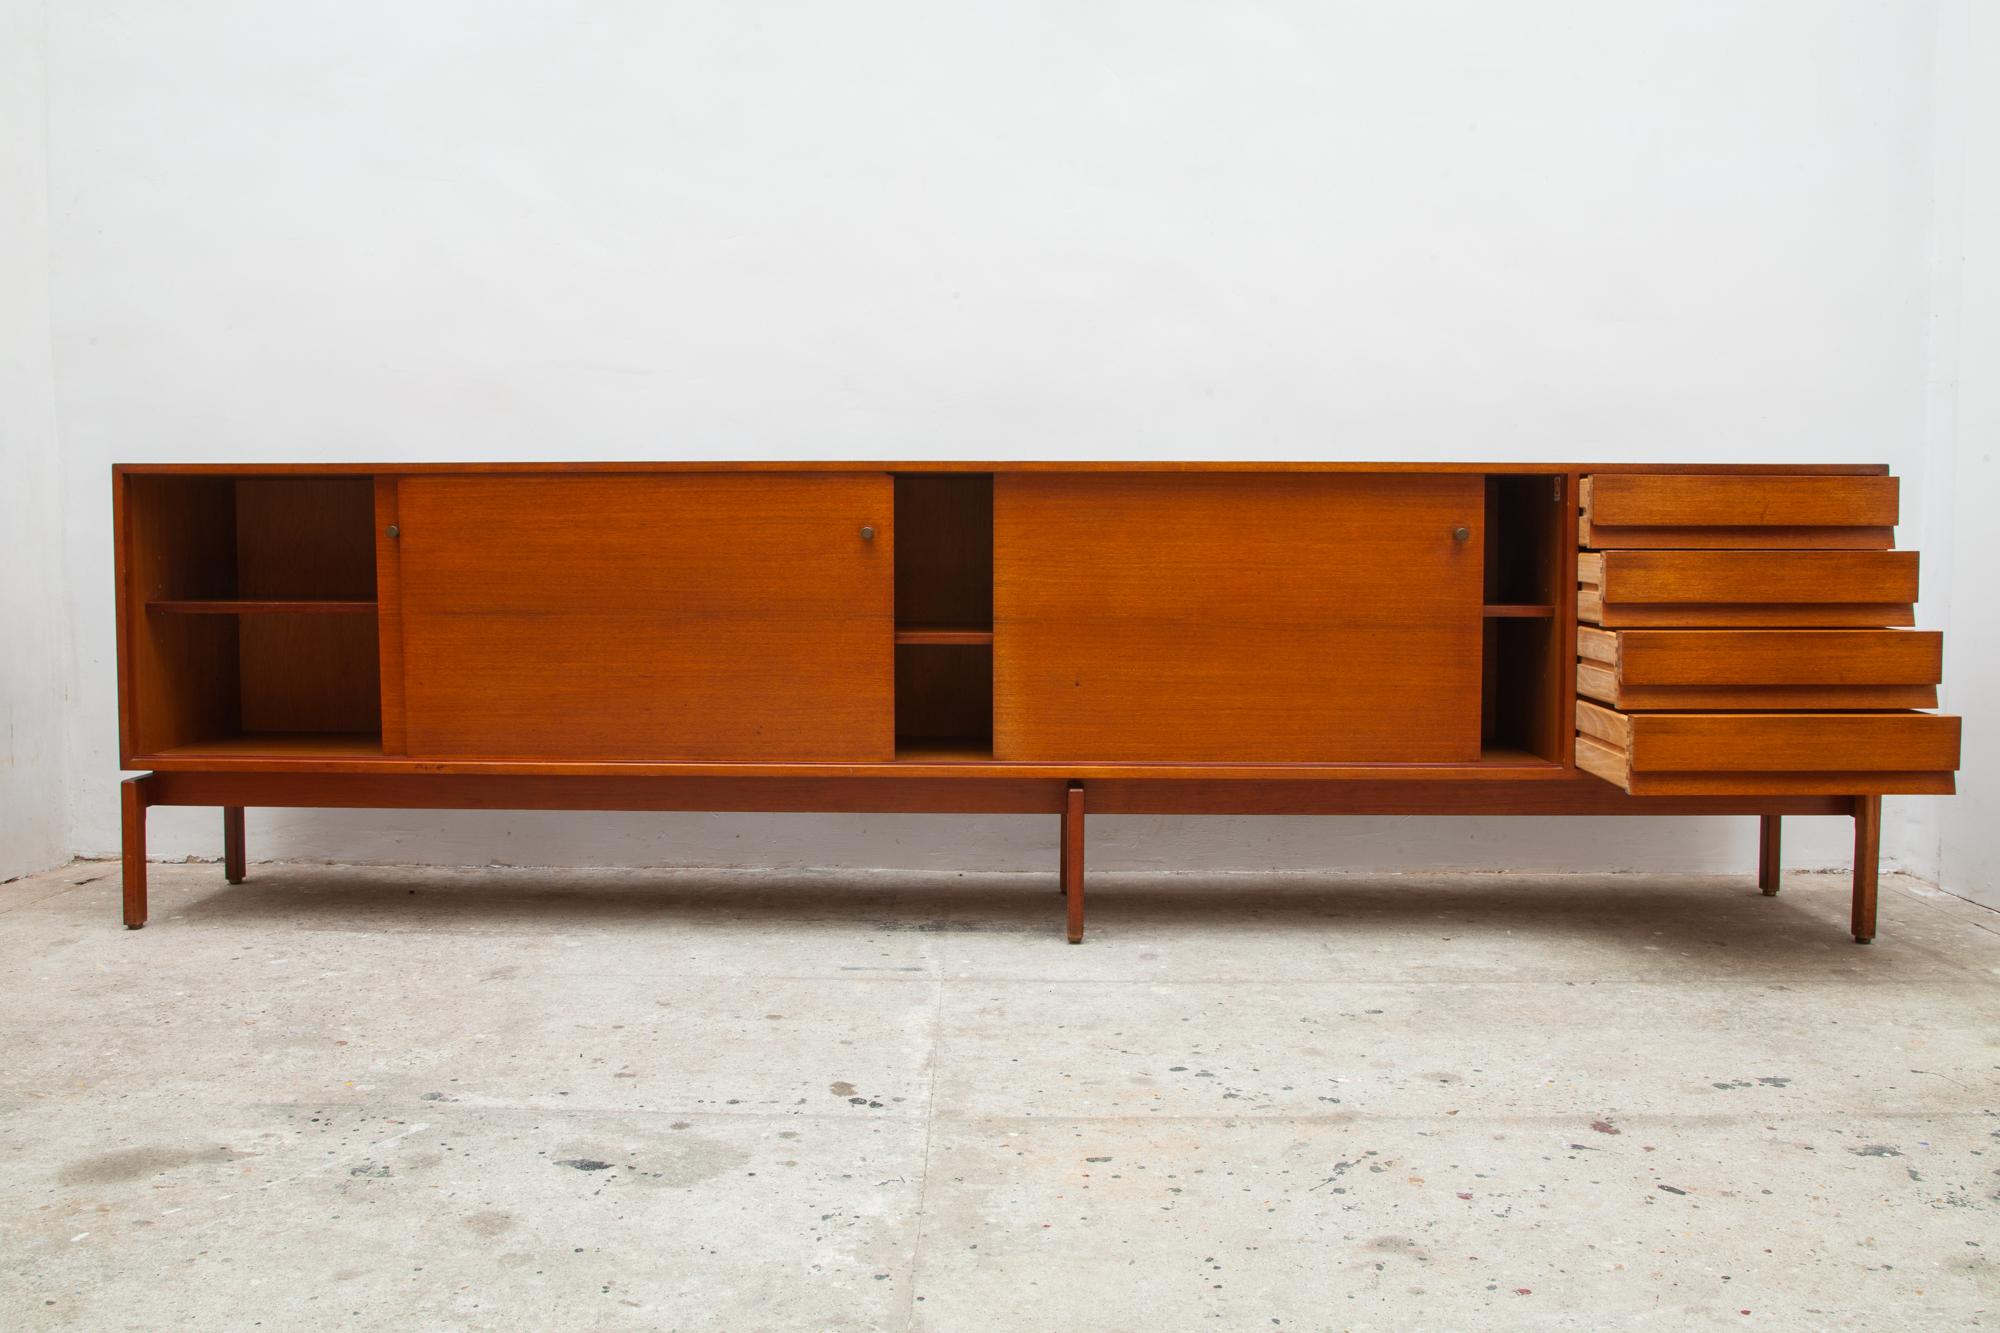 Large sideboard by Van den Berghe-Pauvers Gent, Belgium. This unrestored and in all original condition sideboard was designed by Jos De Mey in the 1950s. Well, known is the work of Jos De Mey, designs of this period are more exclusive and hard to